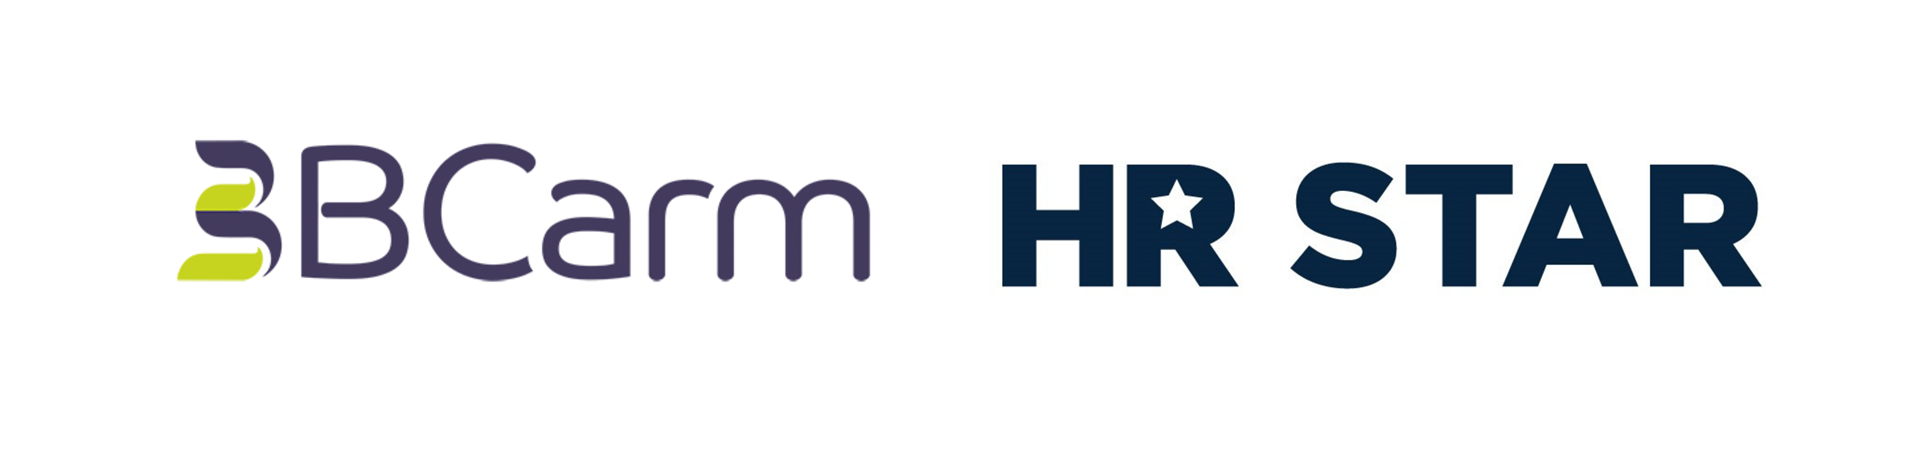 HR Star and BCarm Announce Partnership with Employee Engagement at its Heart